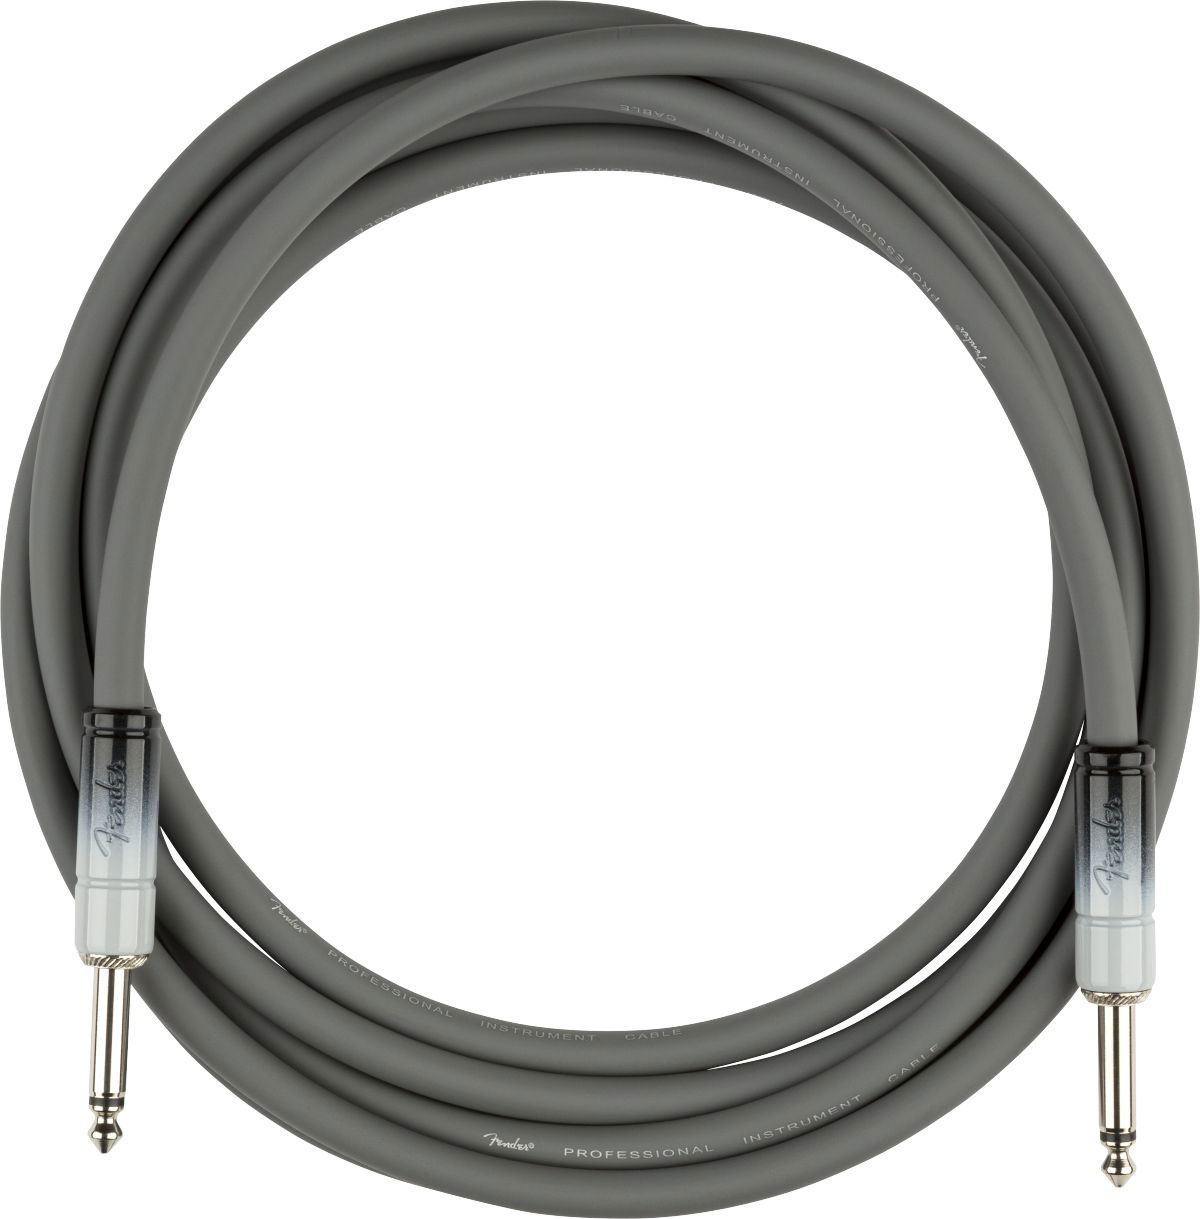 FENDER 10' OMBRE CABLE SILVER SMOKE